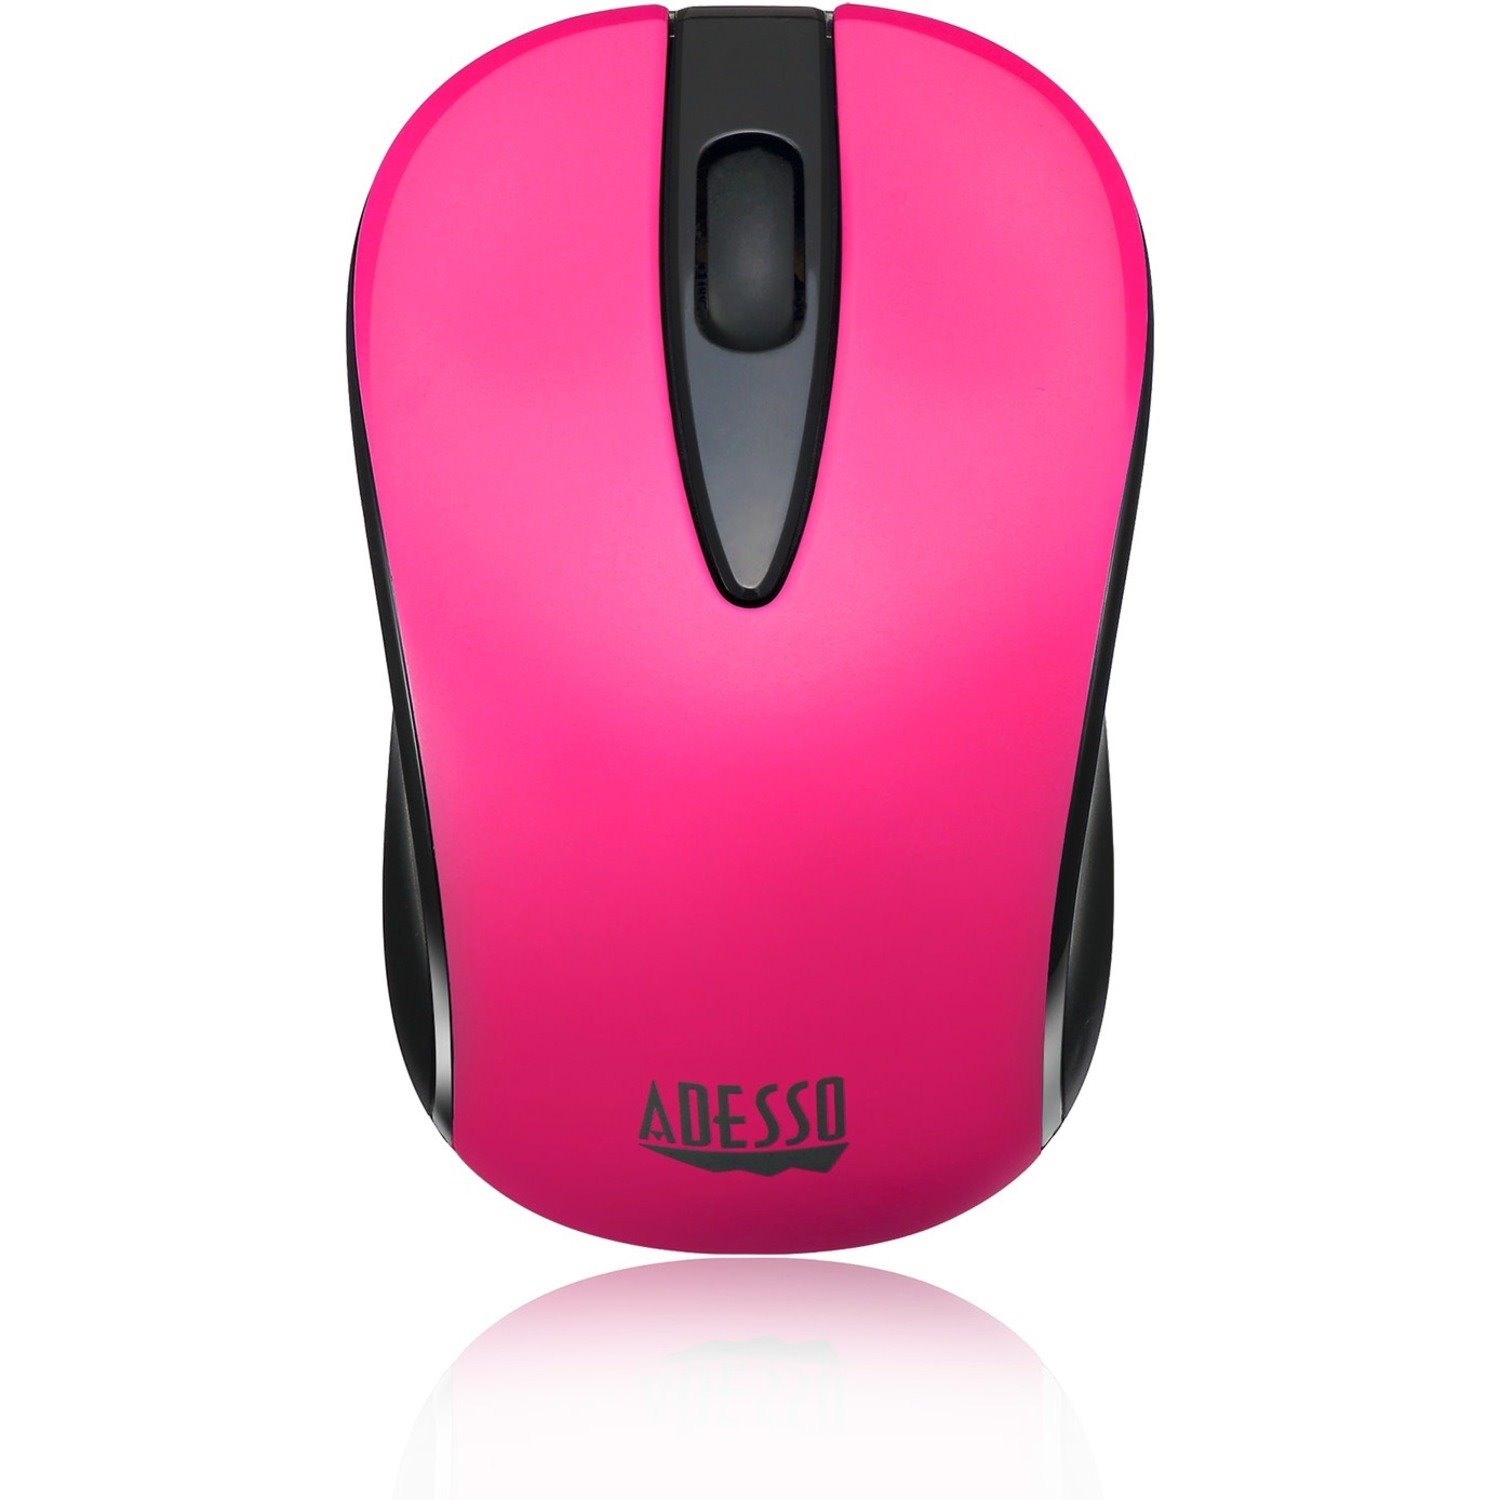 Adesso iMouse S70P - Wireless Optical Neon Mouse